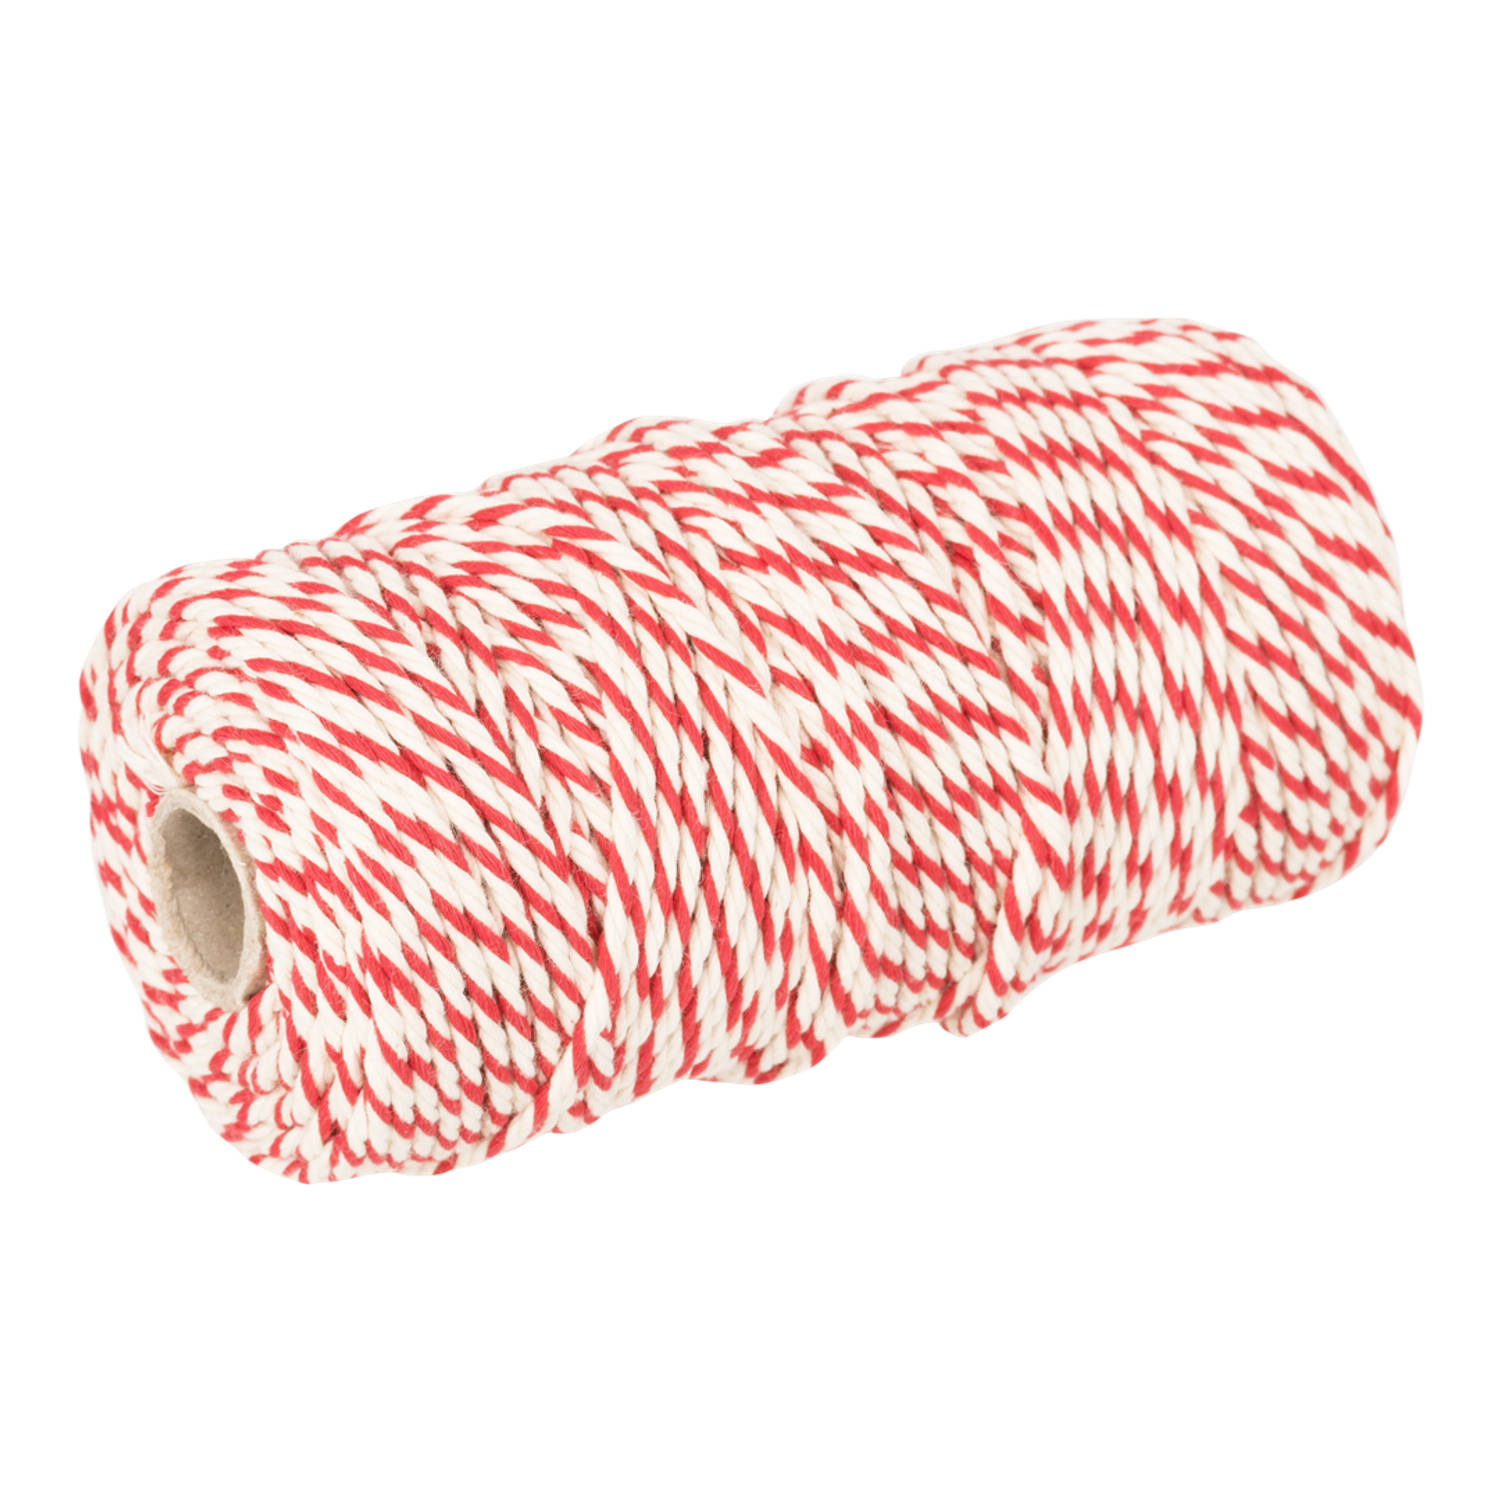 CasaLupo Rolladetouw Wit / Rood 80 meter